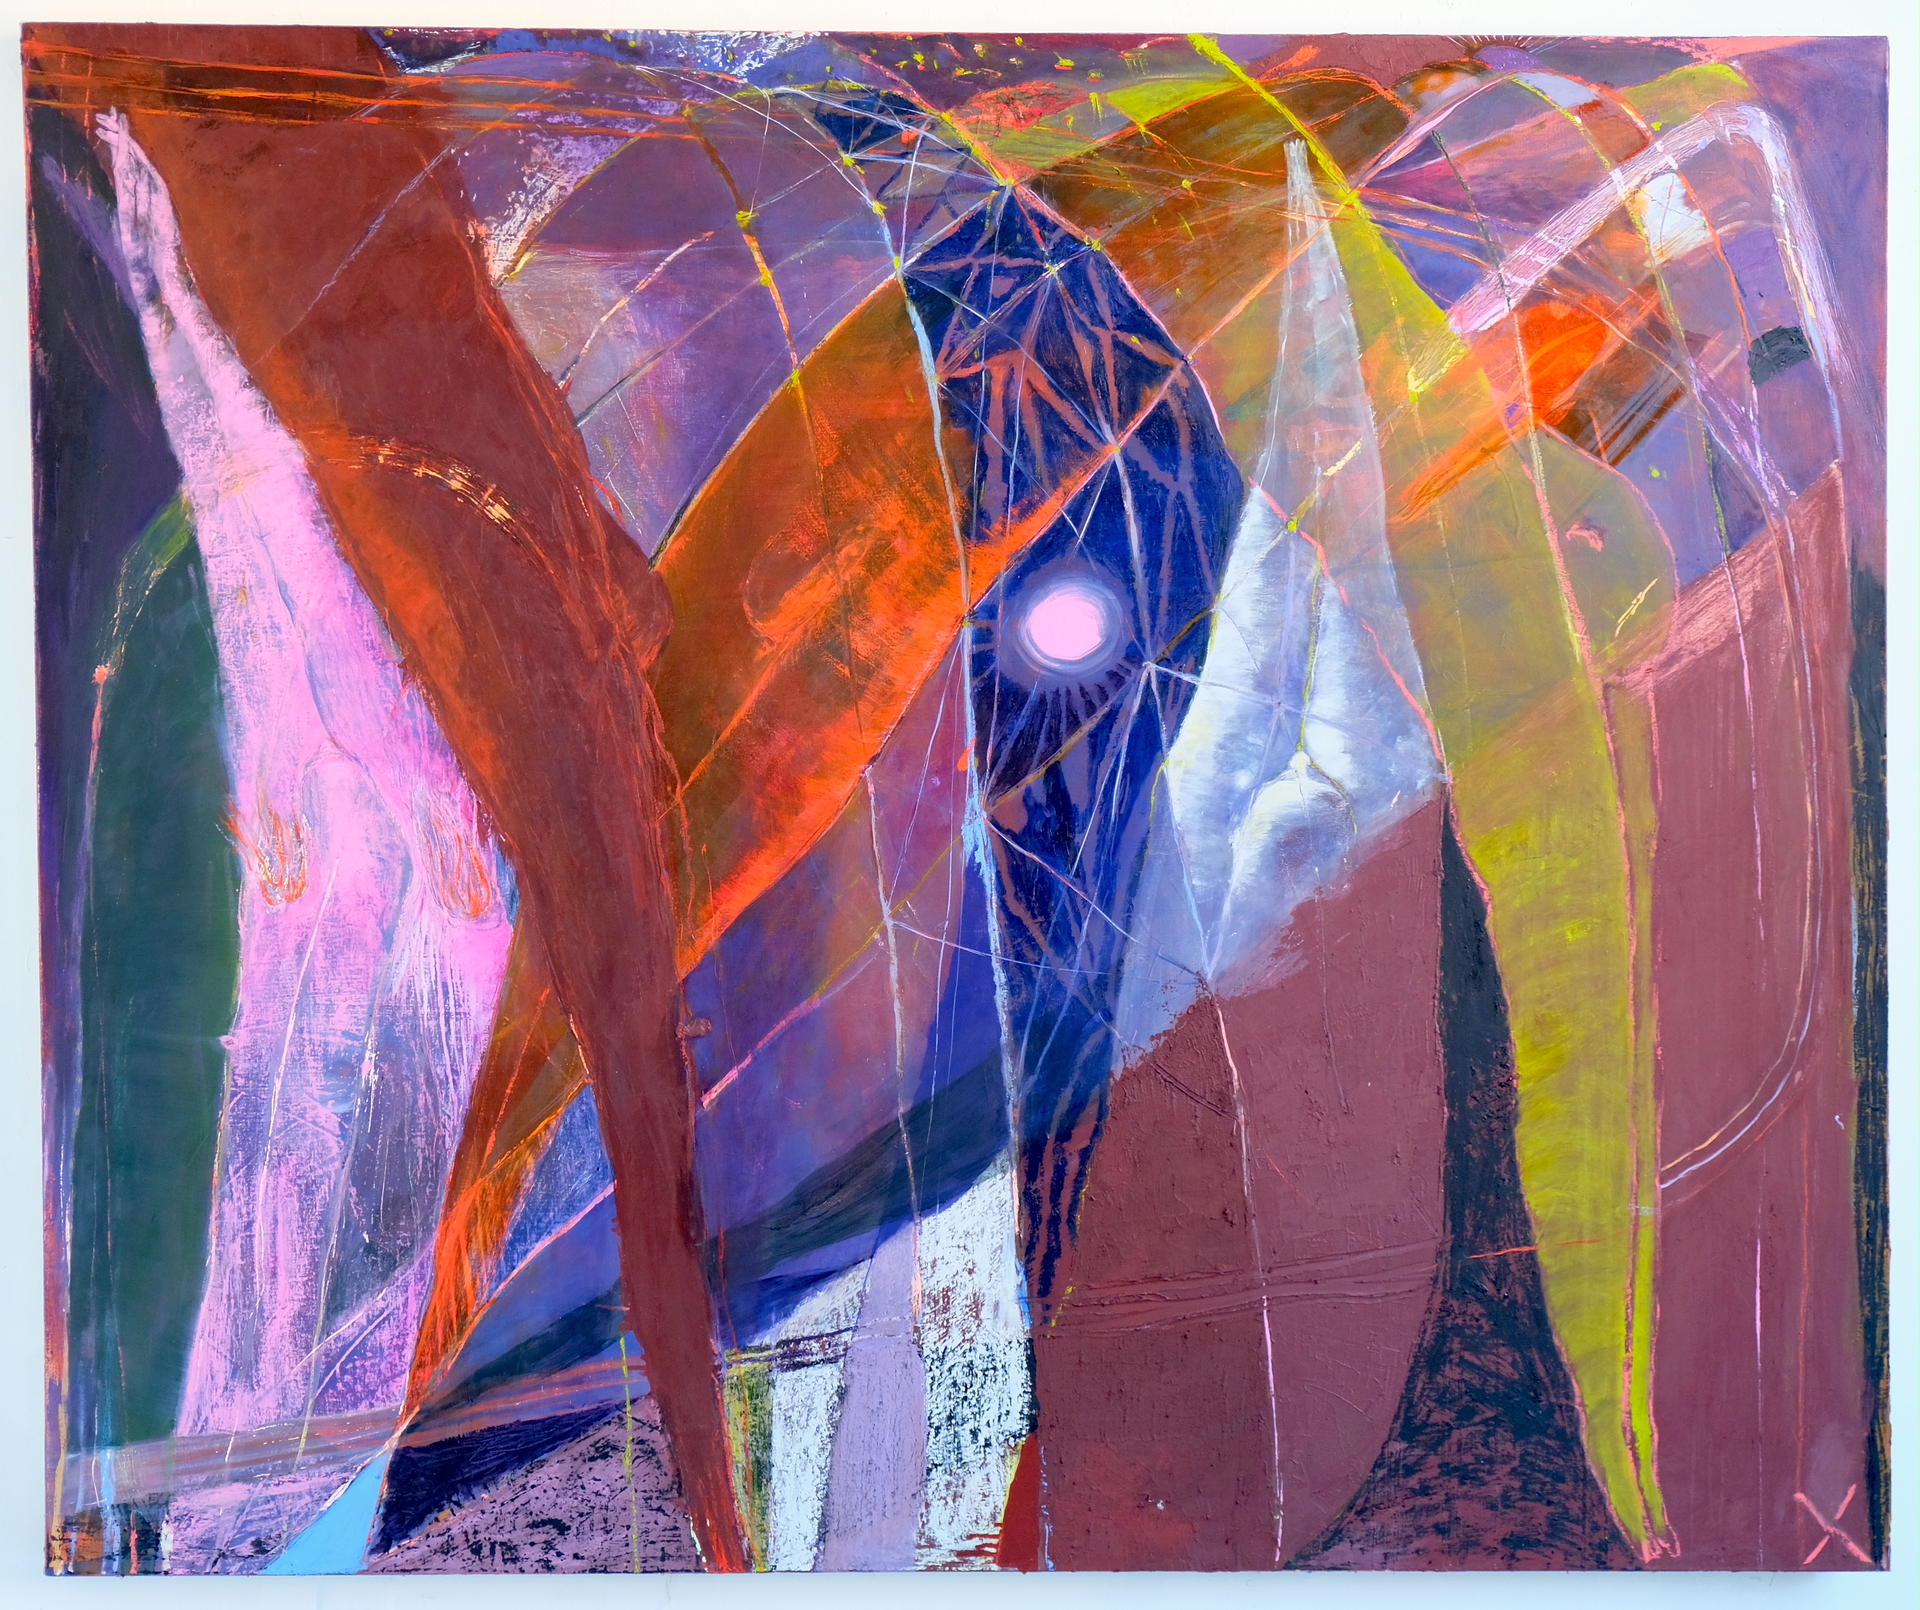 Photo of a crusty oil painting in iridescent purple, pink, lime green, earth red, and orange. Abstracted bodies dive through a net of loops as if underwater.